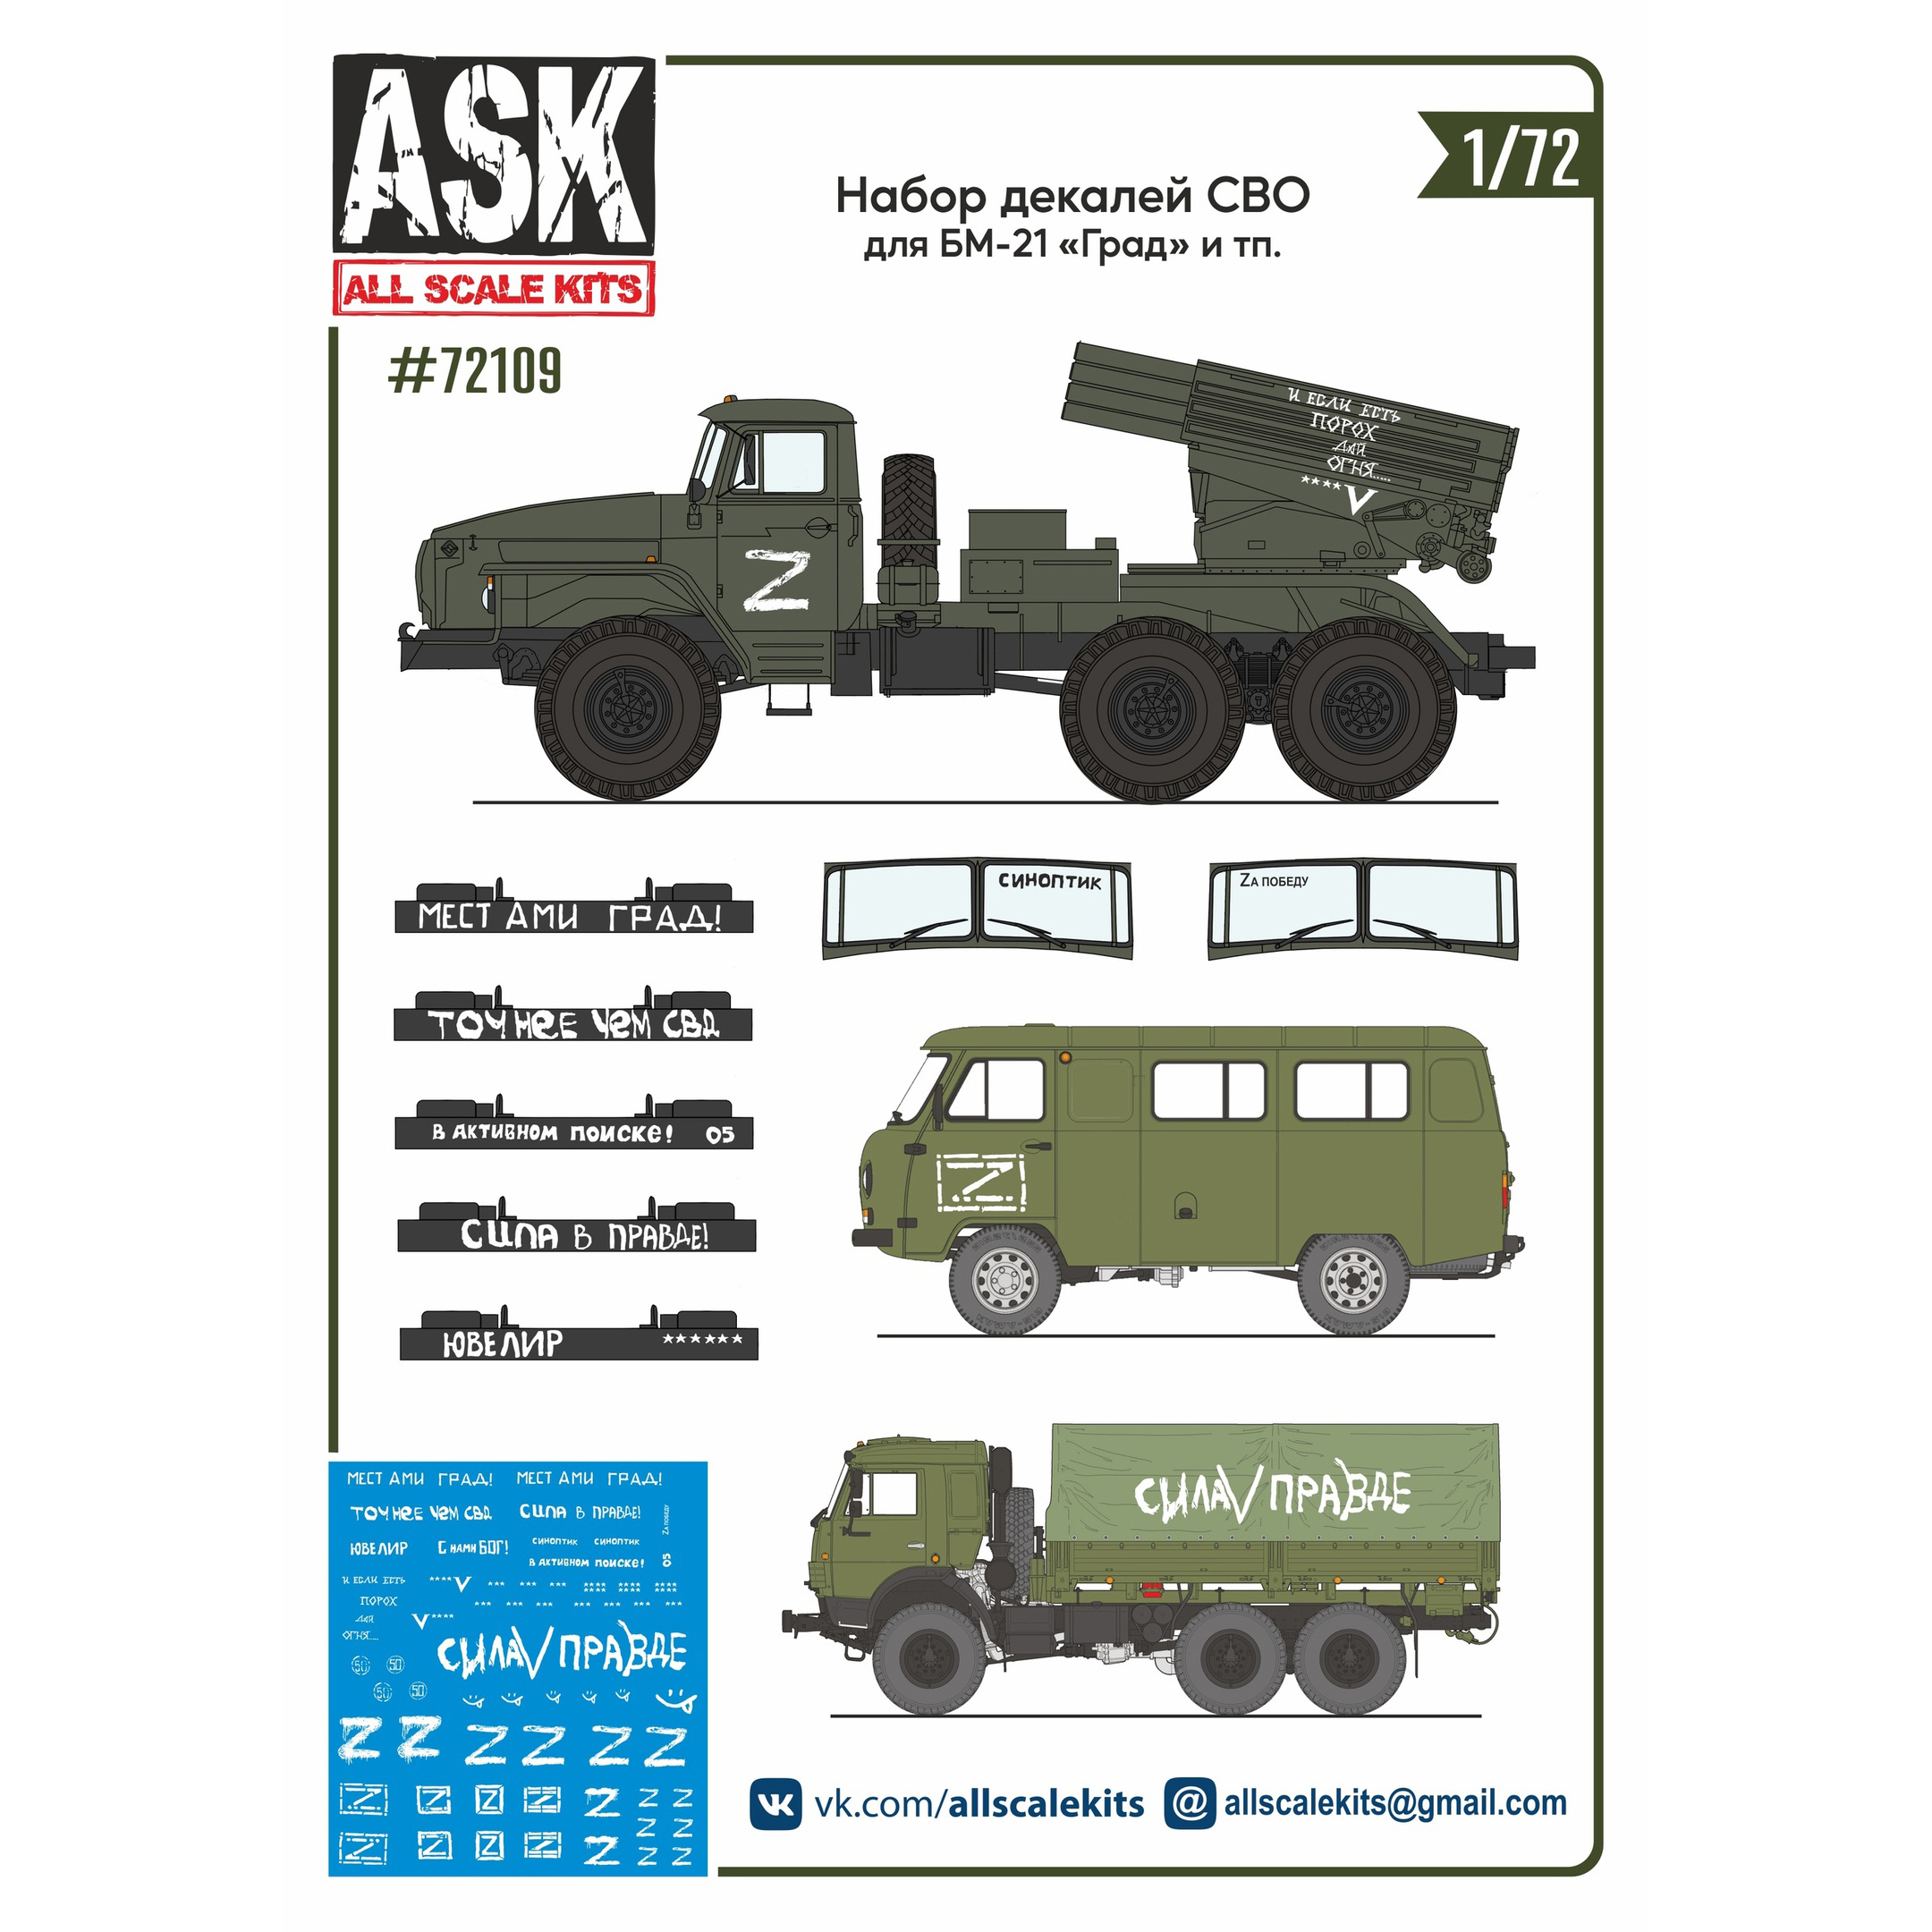 ASK72109 All Scale Kits (ASK) 1/72 Набор декалей СВО (для БМ-21 